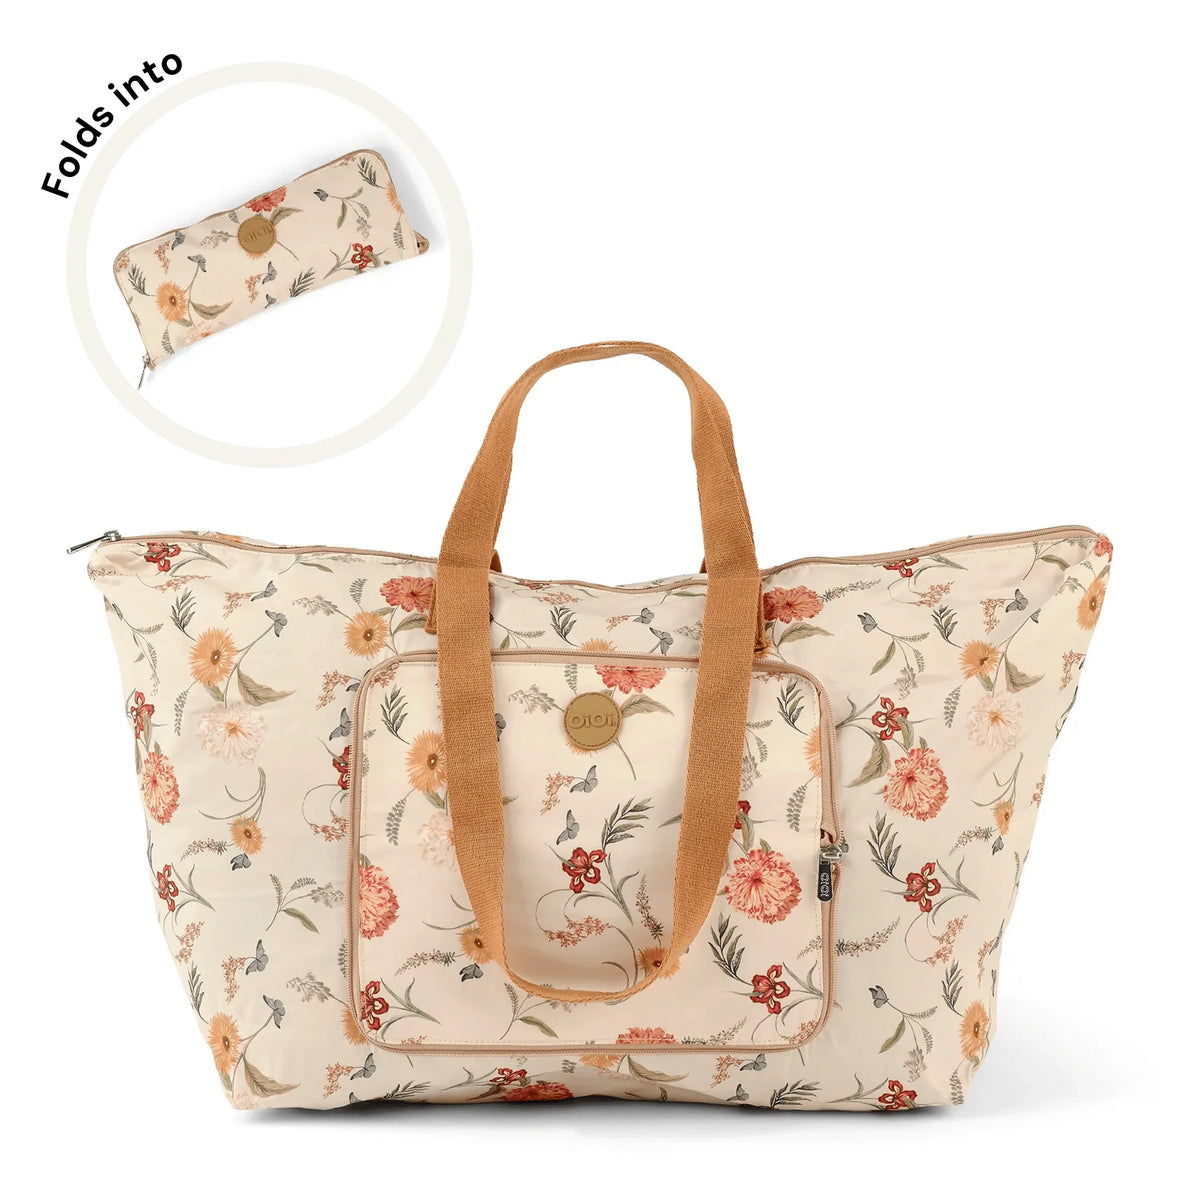 OiOi Fold-up Tote - Wildflower